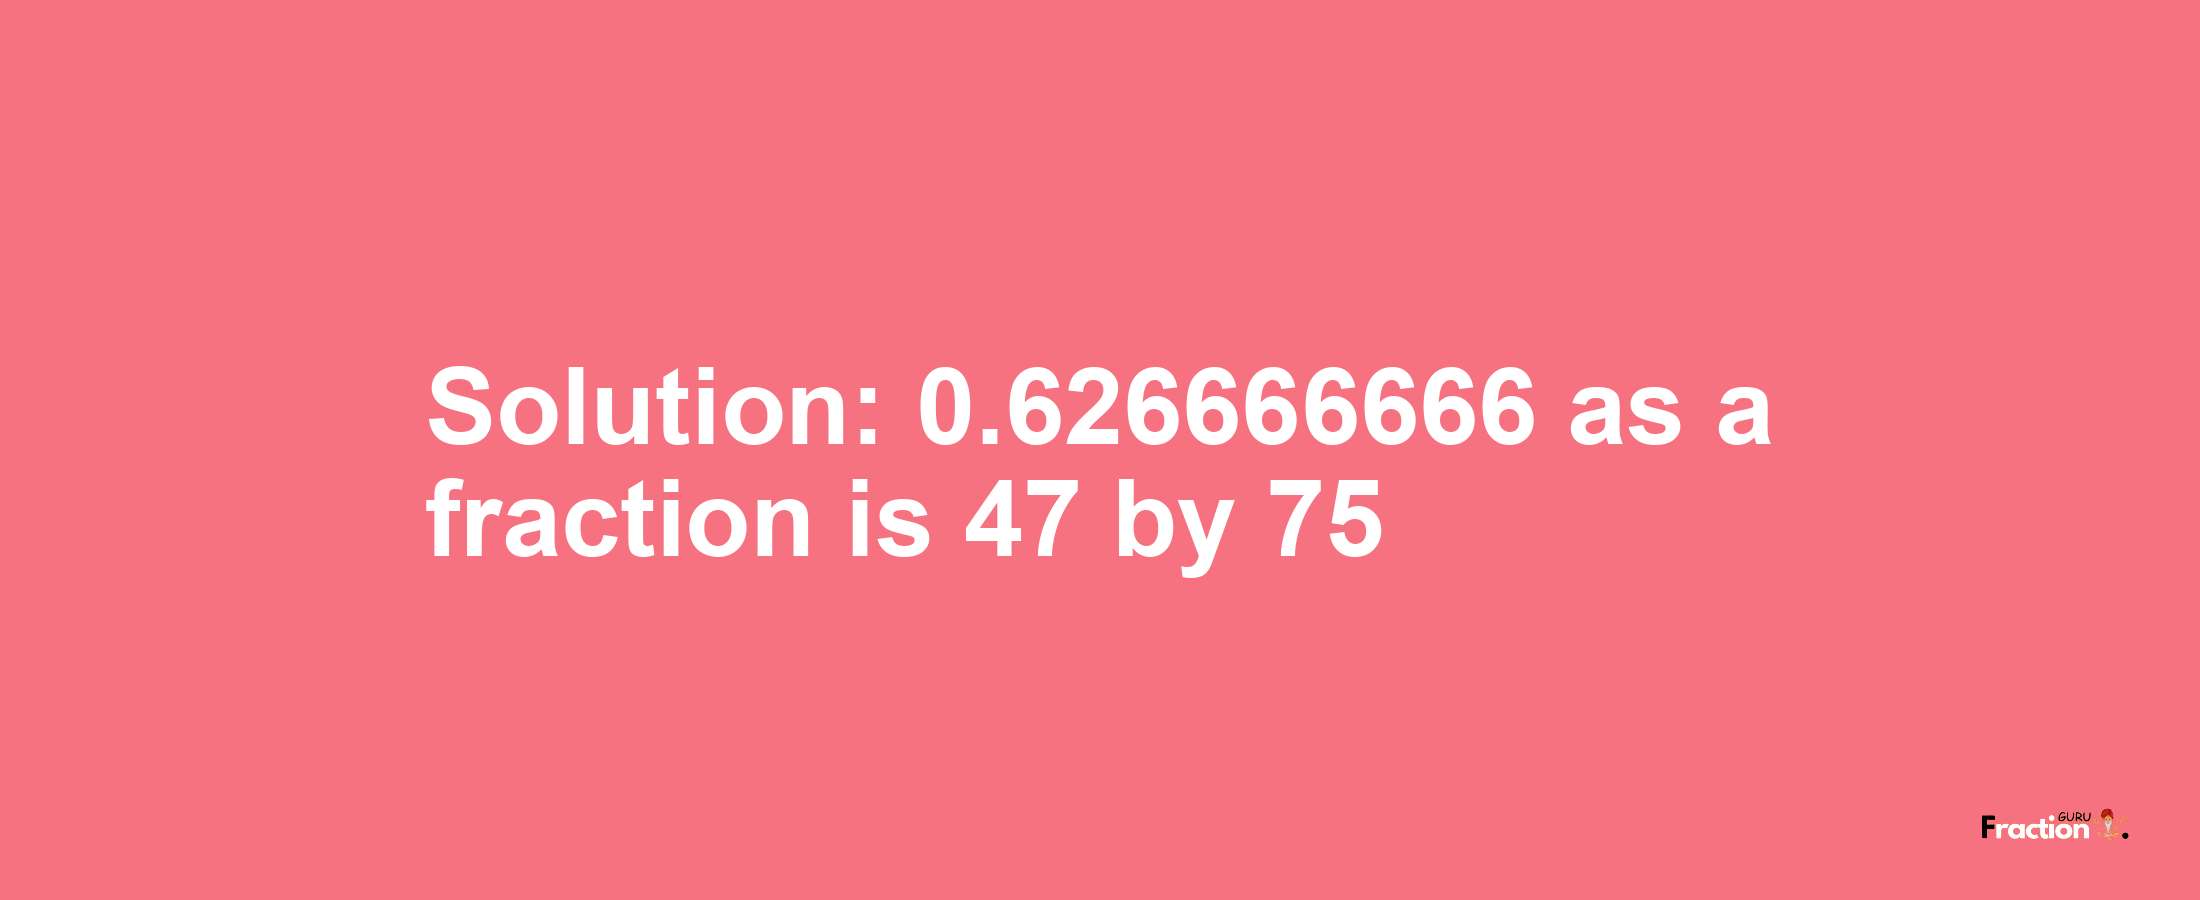 Solution:0.626666666 as a fraction is 47/75